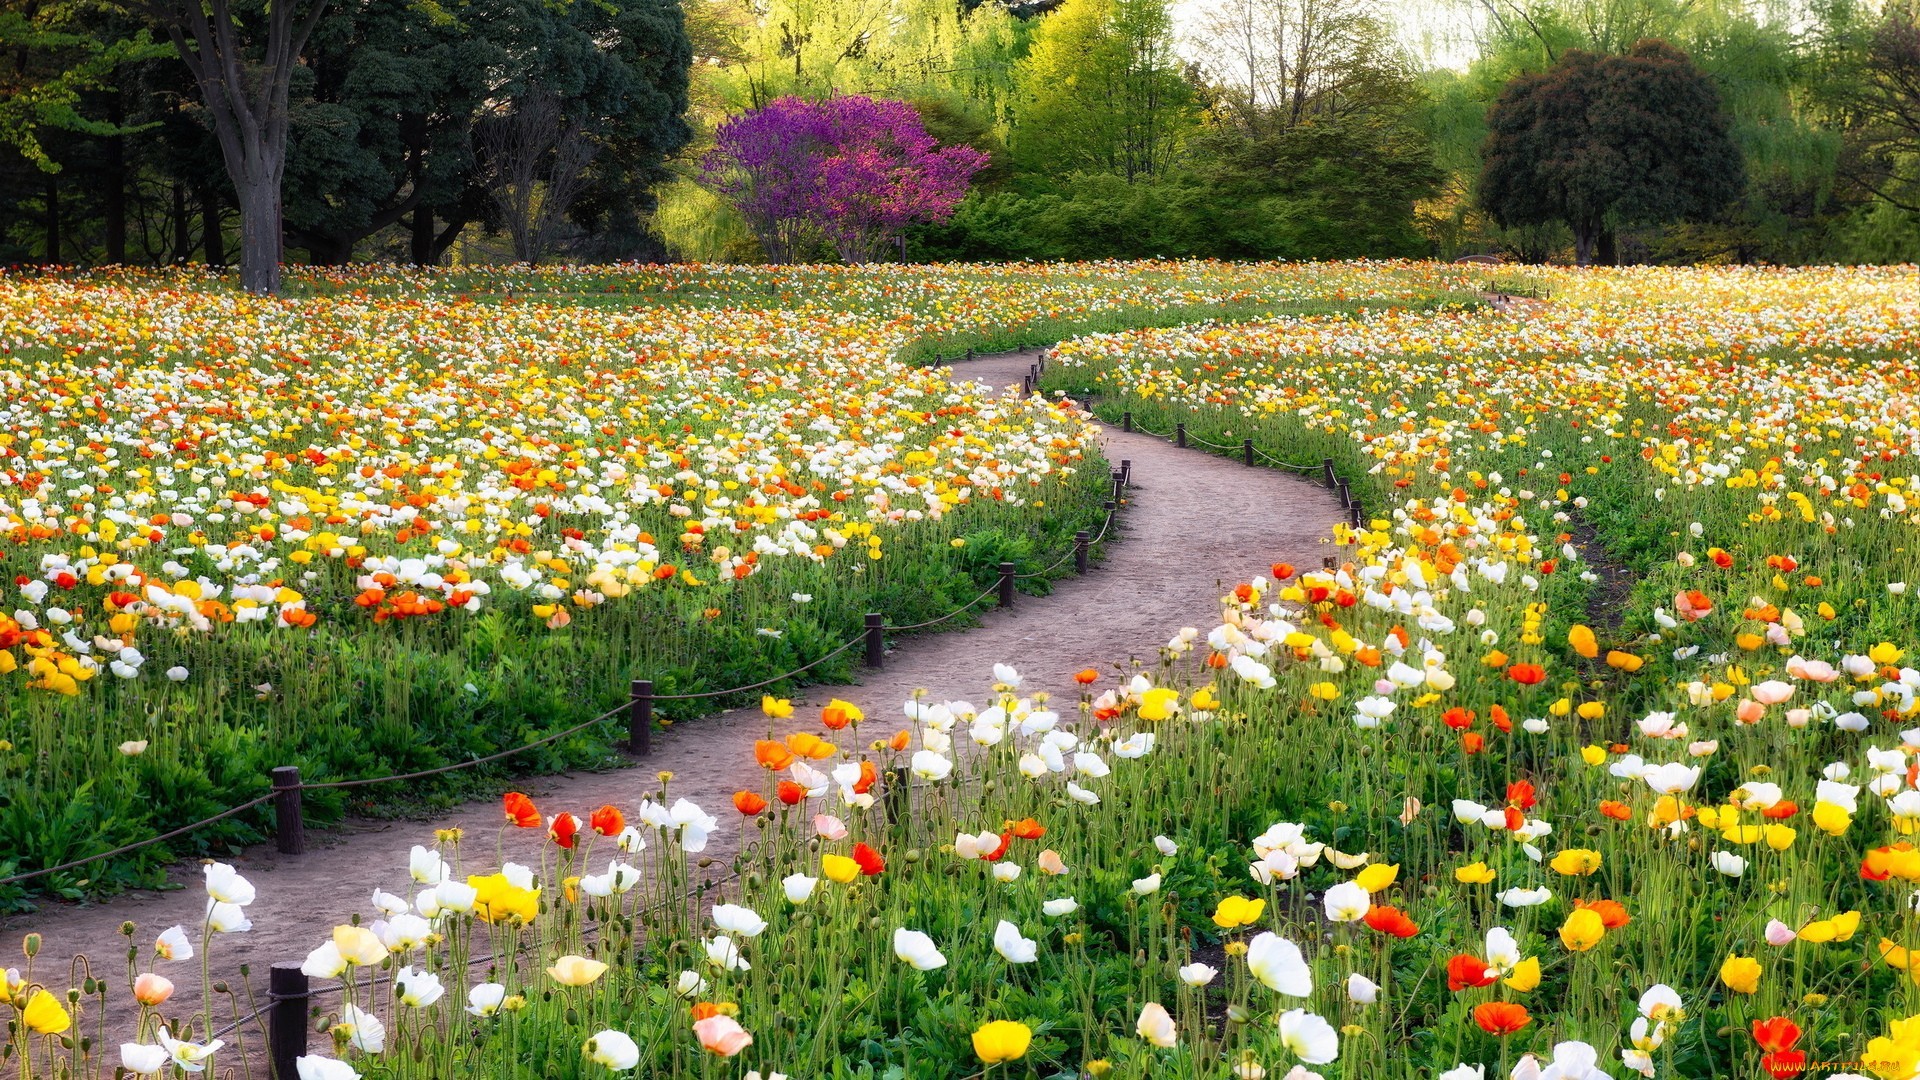 General 1920x1080 garden poppies flowers trees path plants colorful